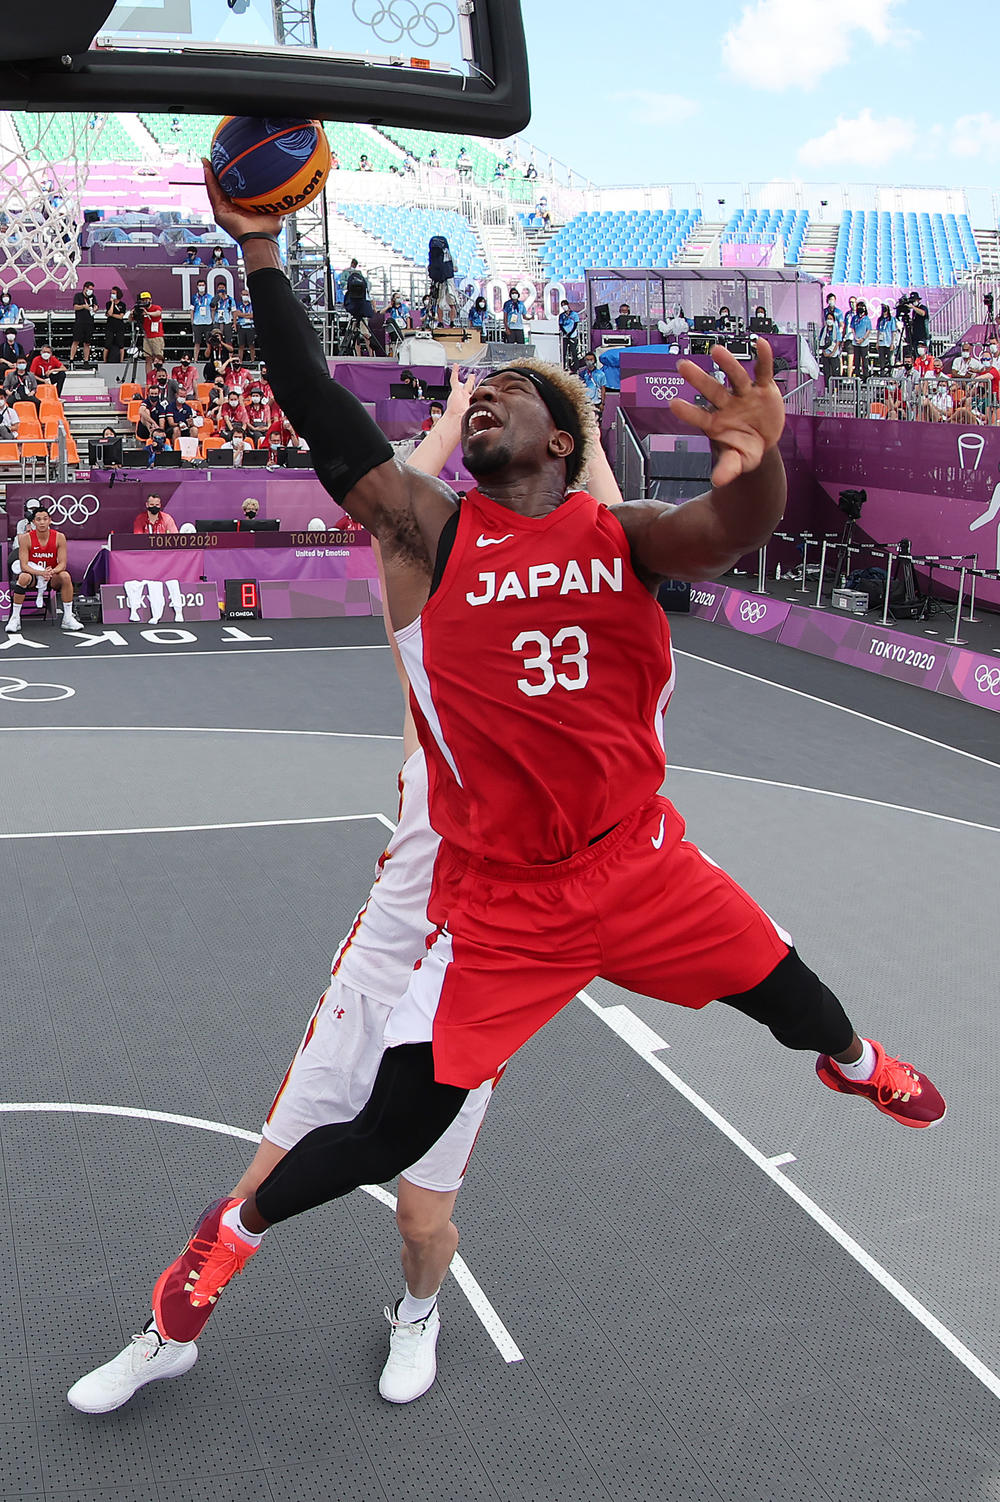 Ira Brown of Team Japan drives to the basket in the 3x3 Basketball competition on Tuesday at the Tokyo 2020 Olympic Games.